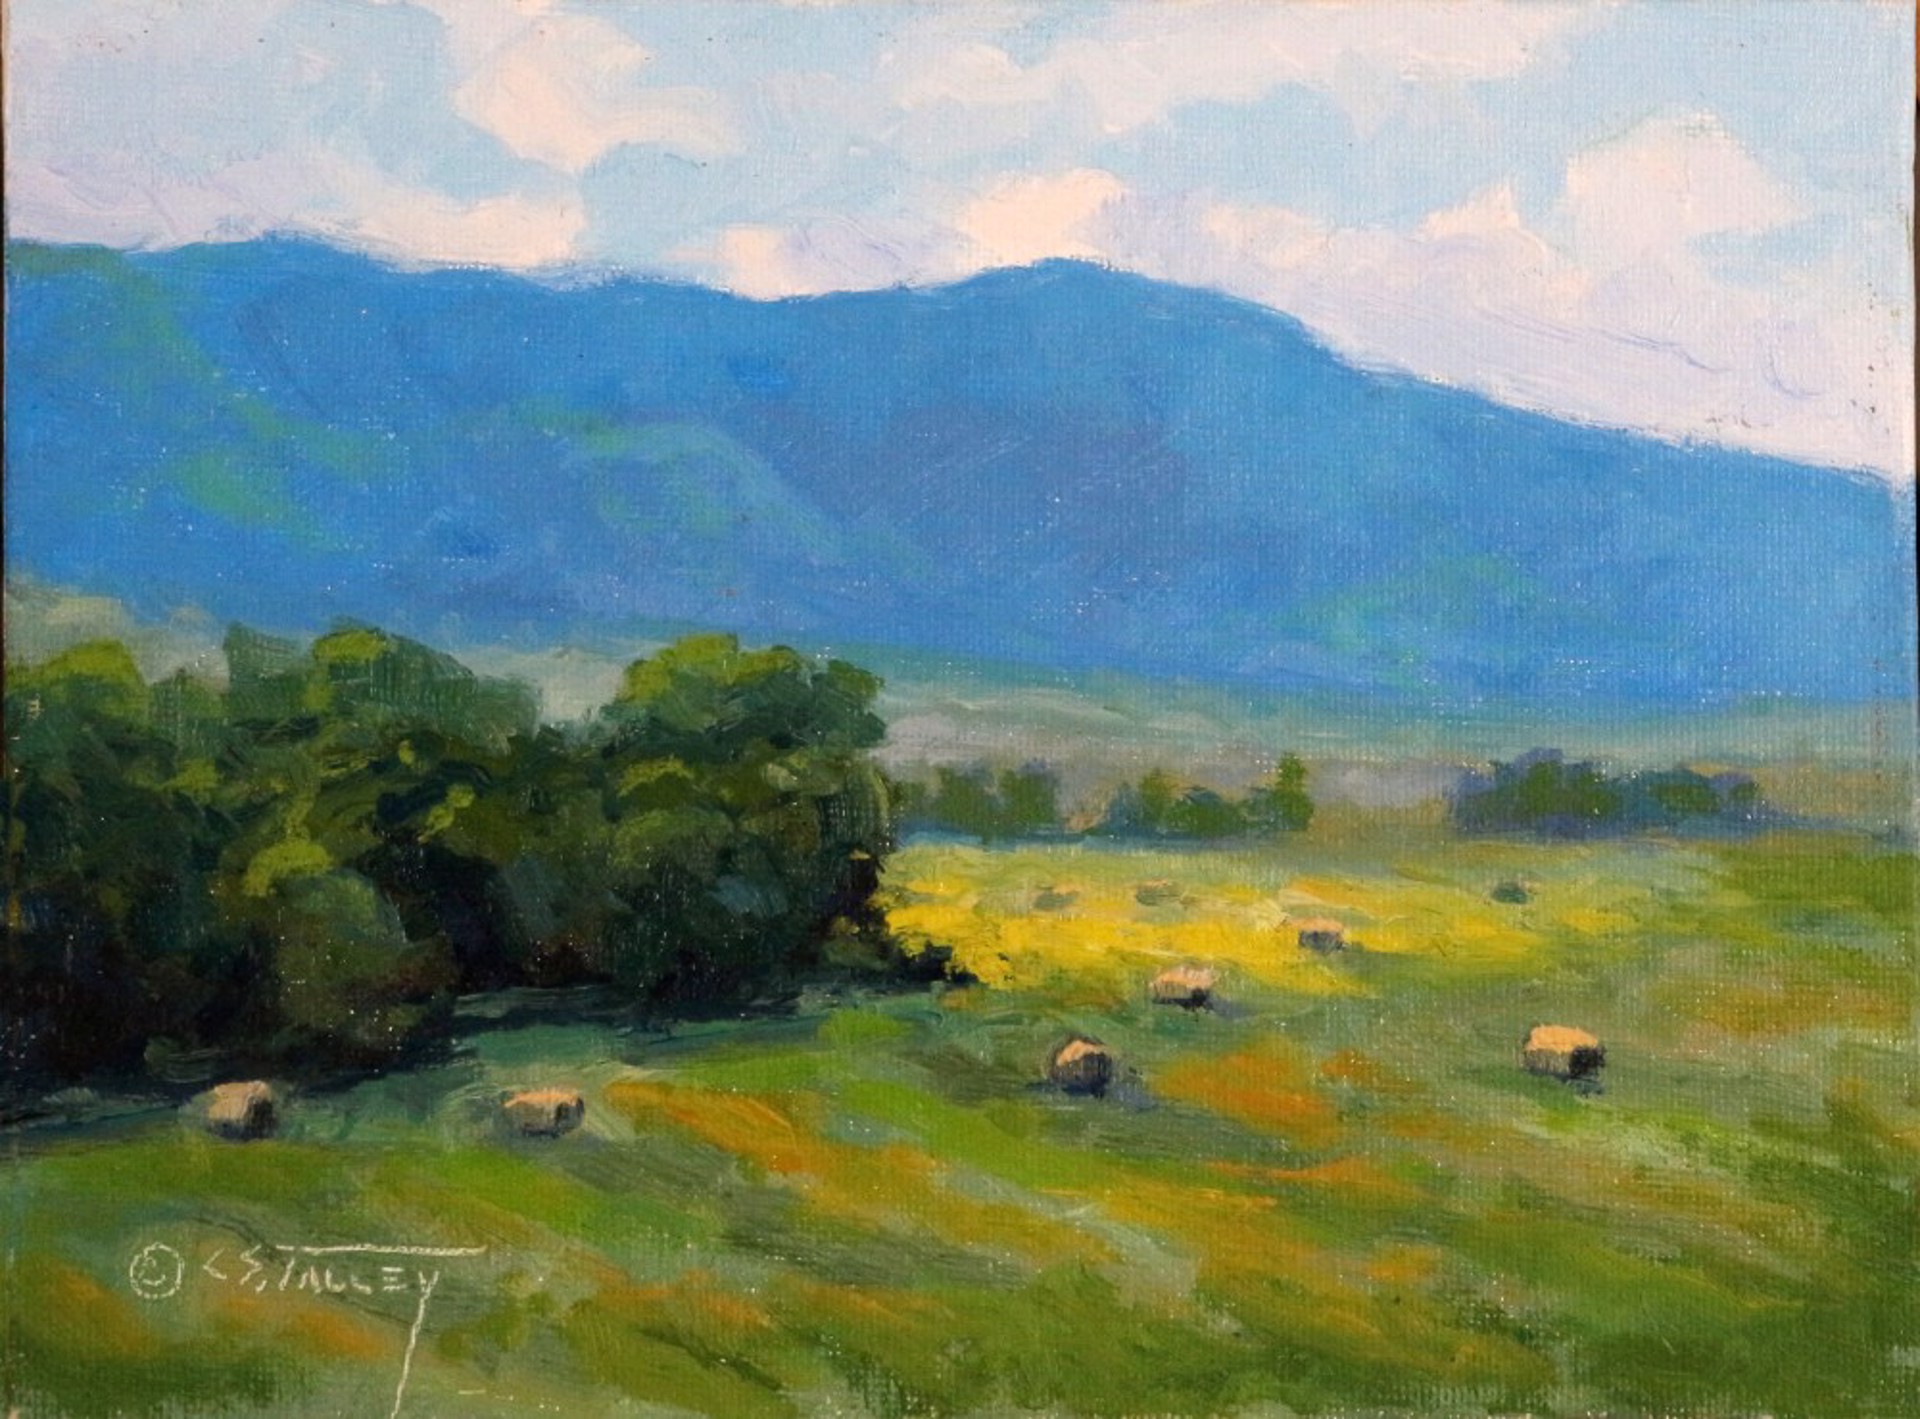 Harvest in Montana by C. S. Talley